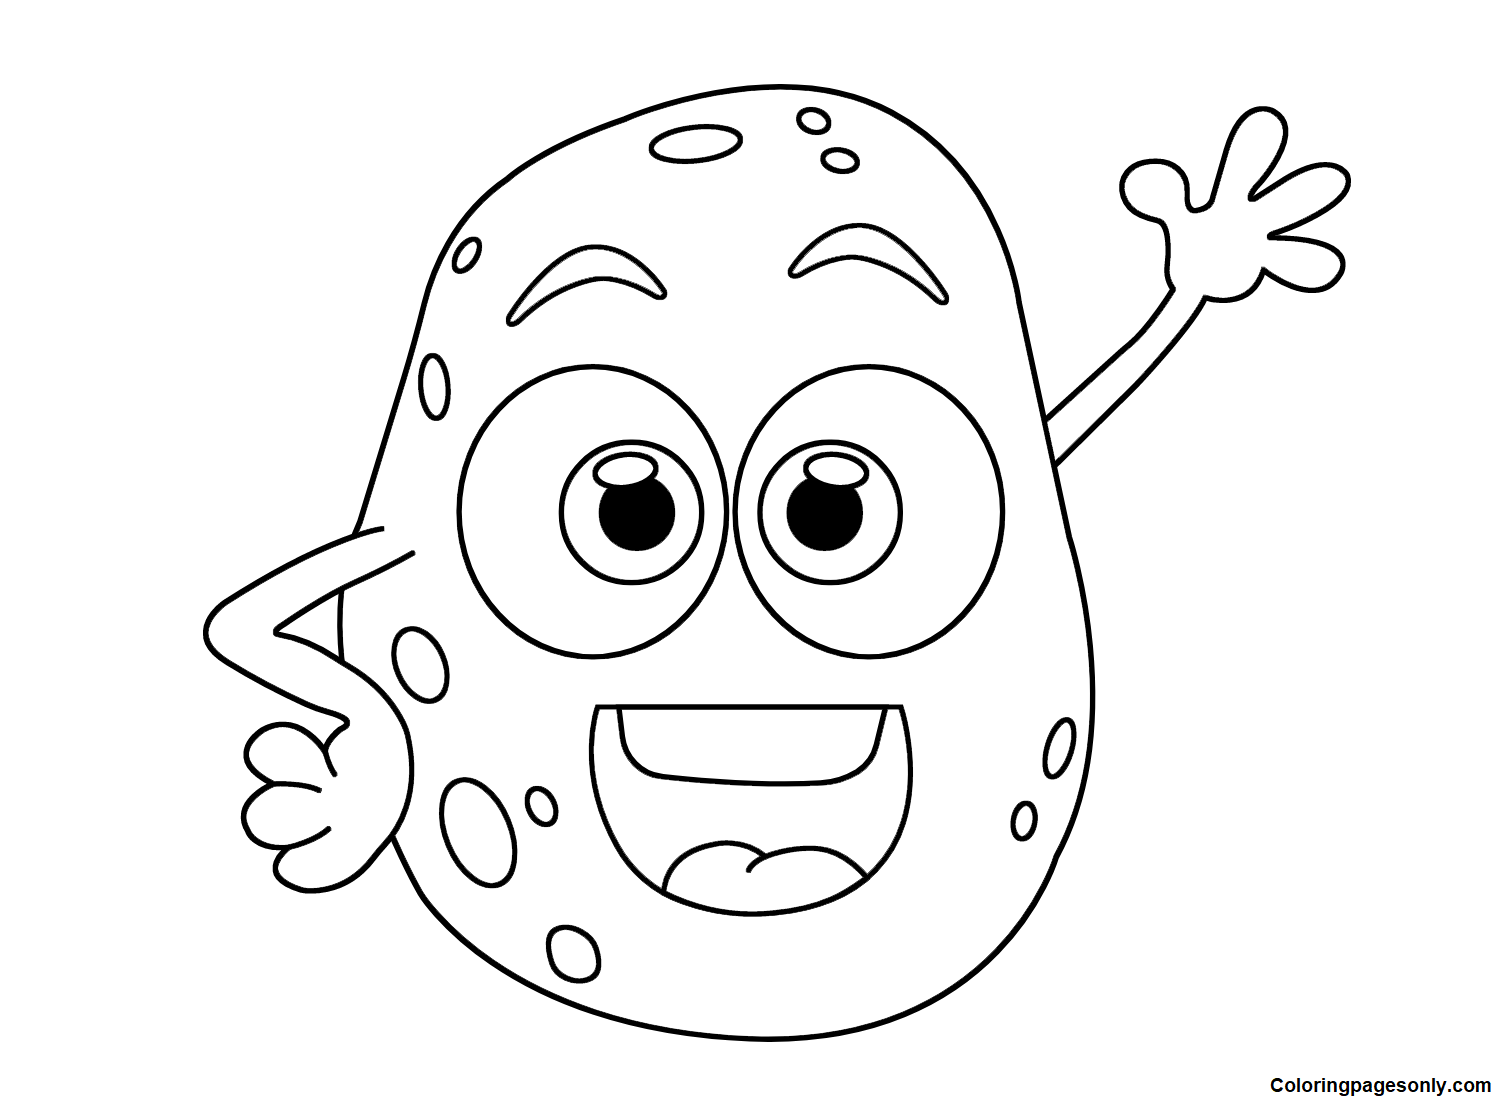 Funny Sweet Potato Coloring Page